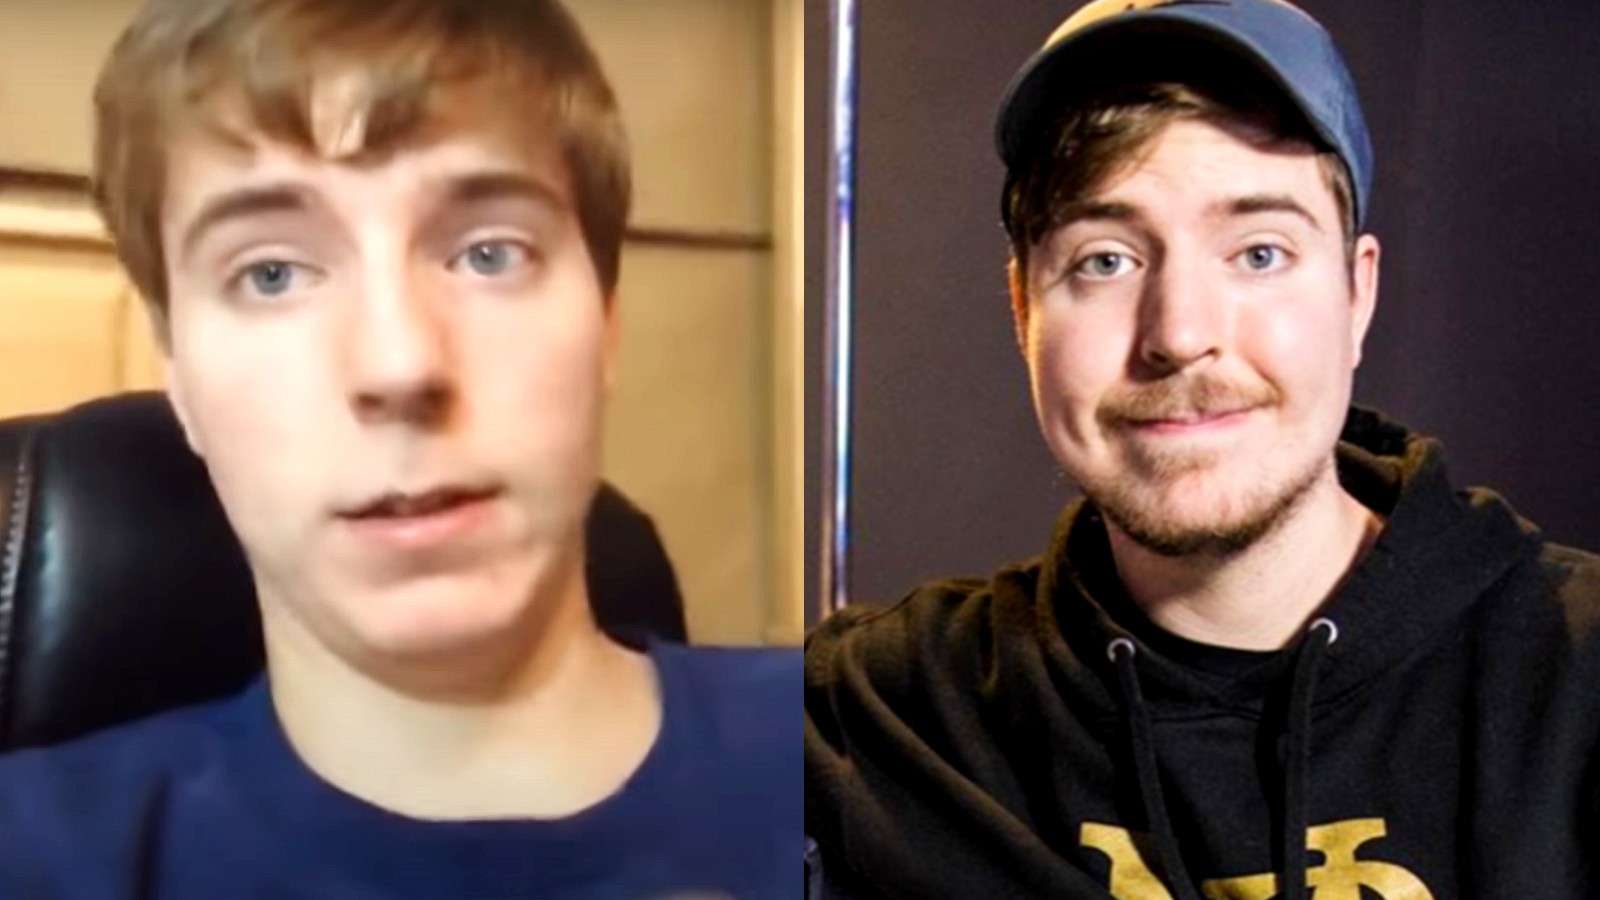 Mr Beast from 2015 and Mr Beast from 2020 side by side